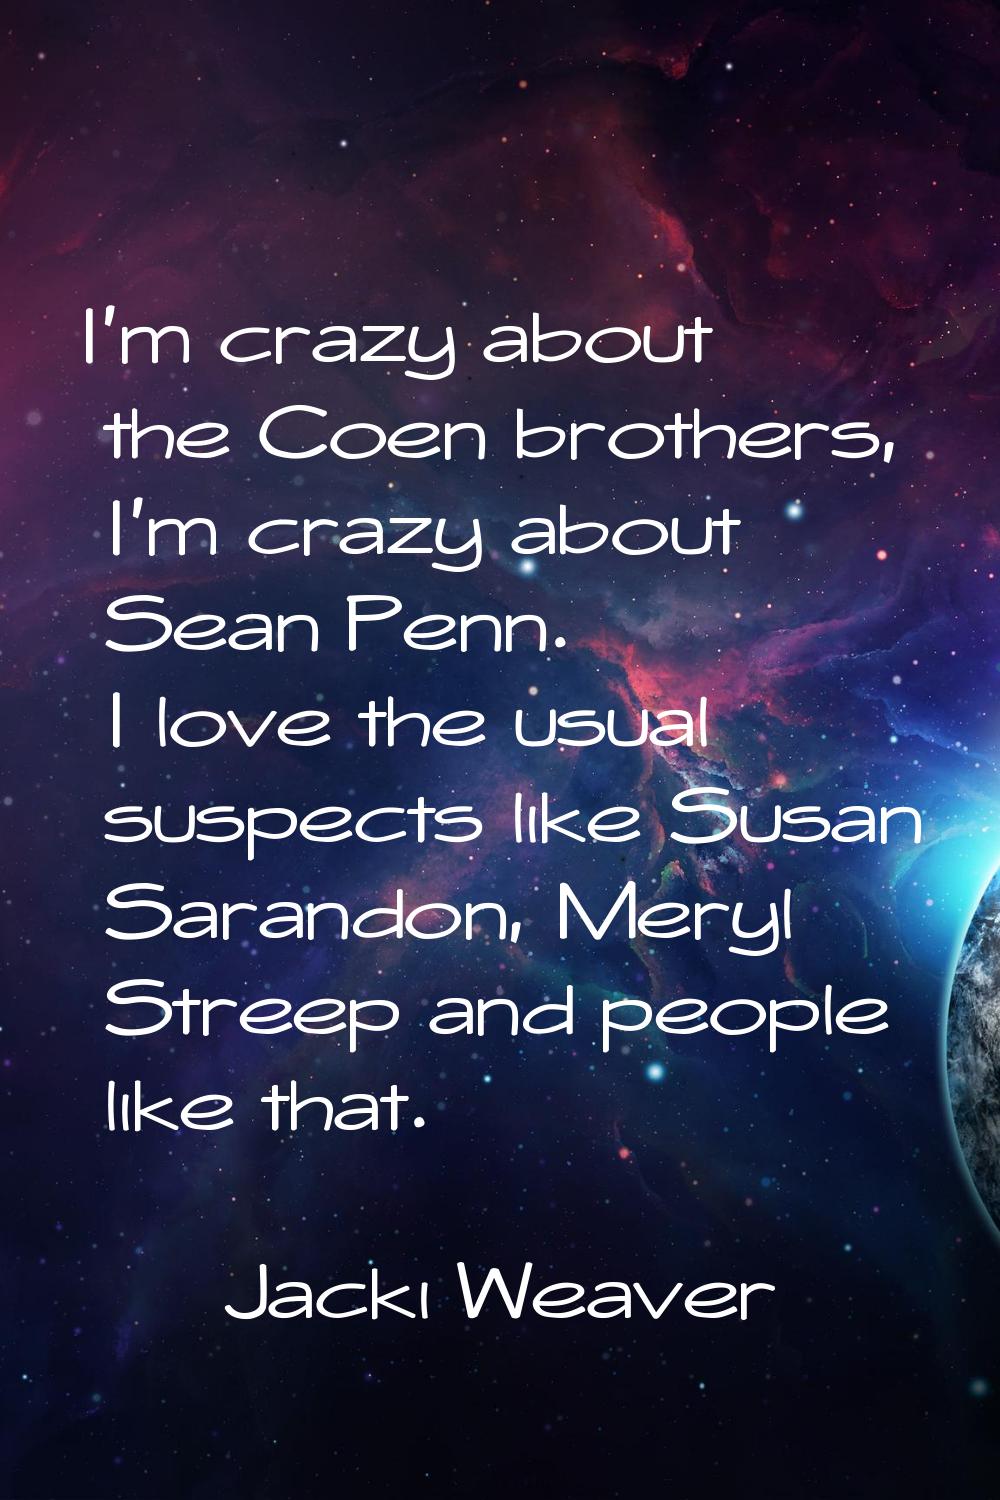 I'm crazy about the Coen brothers, I'm crazy about Sean Penn. I love the usual suspects like Susan 